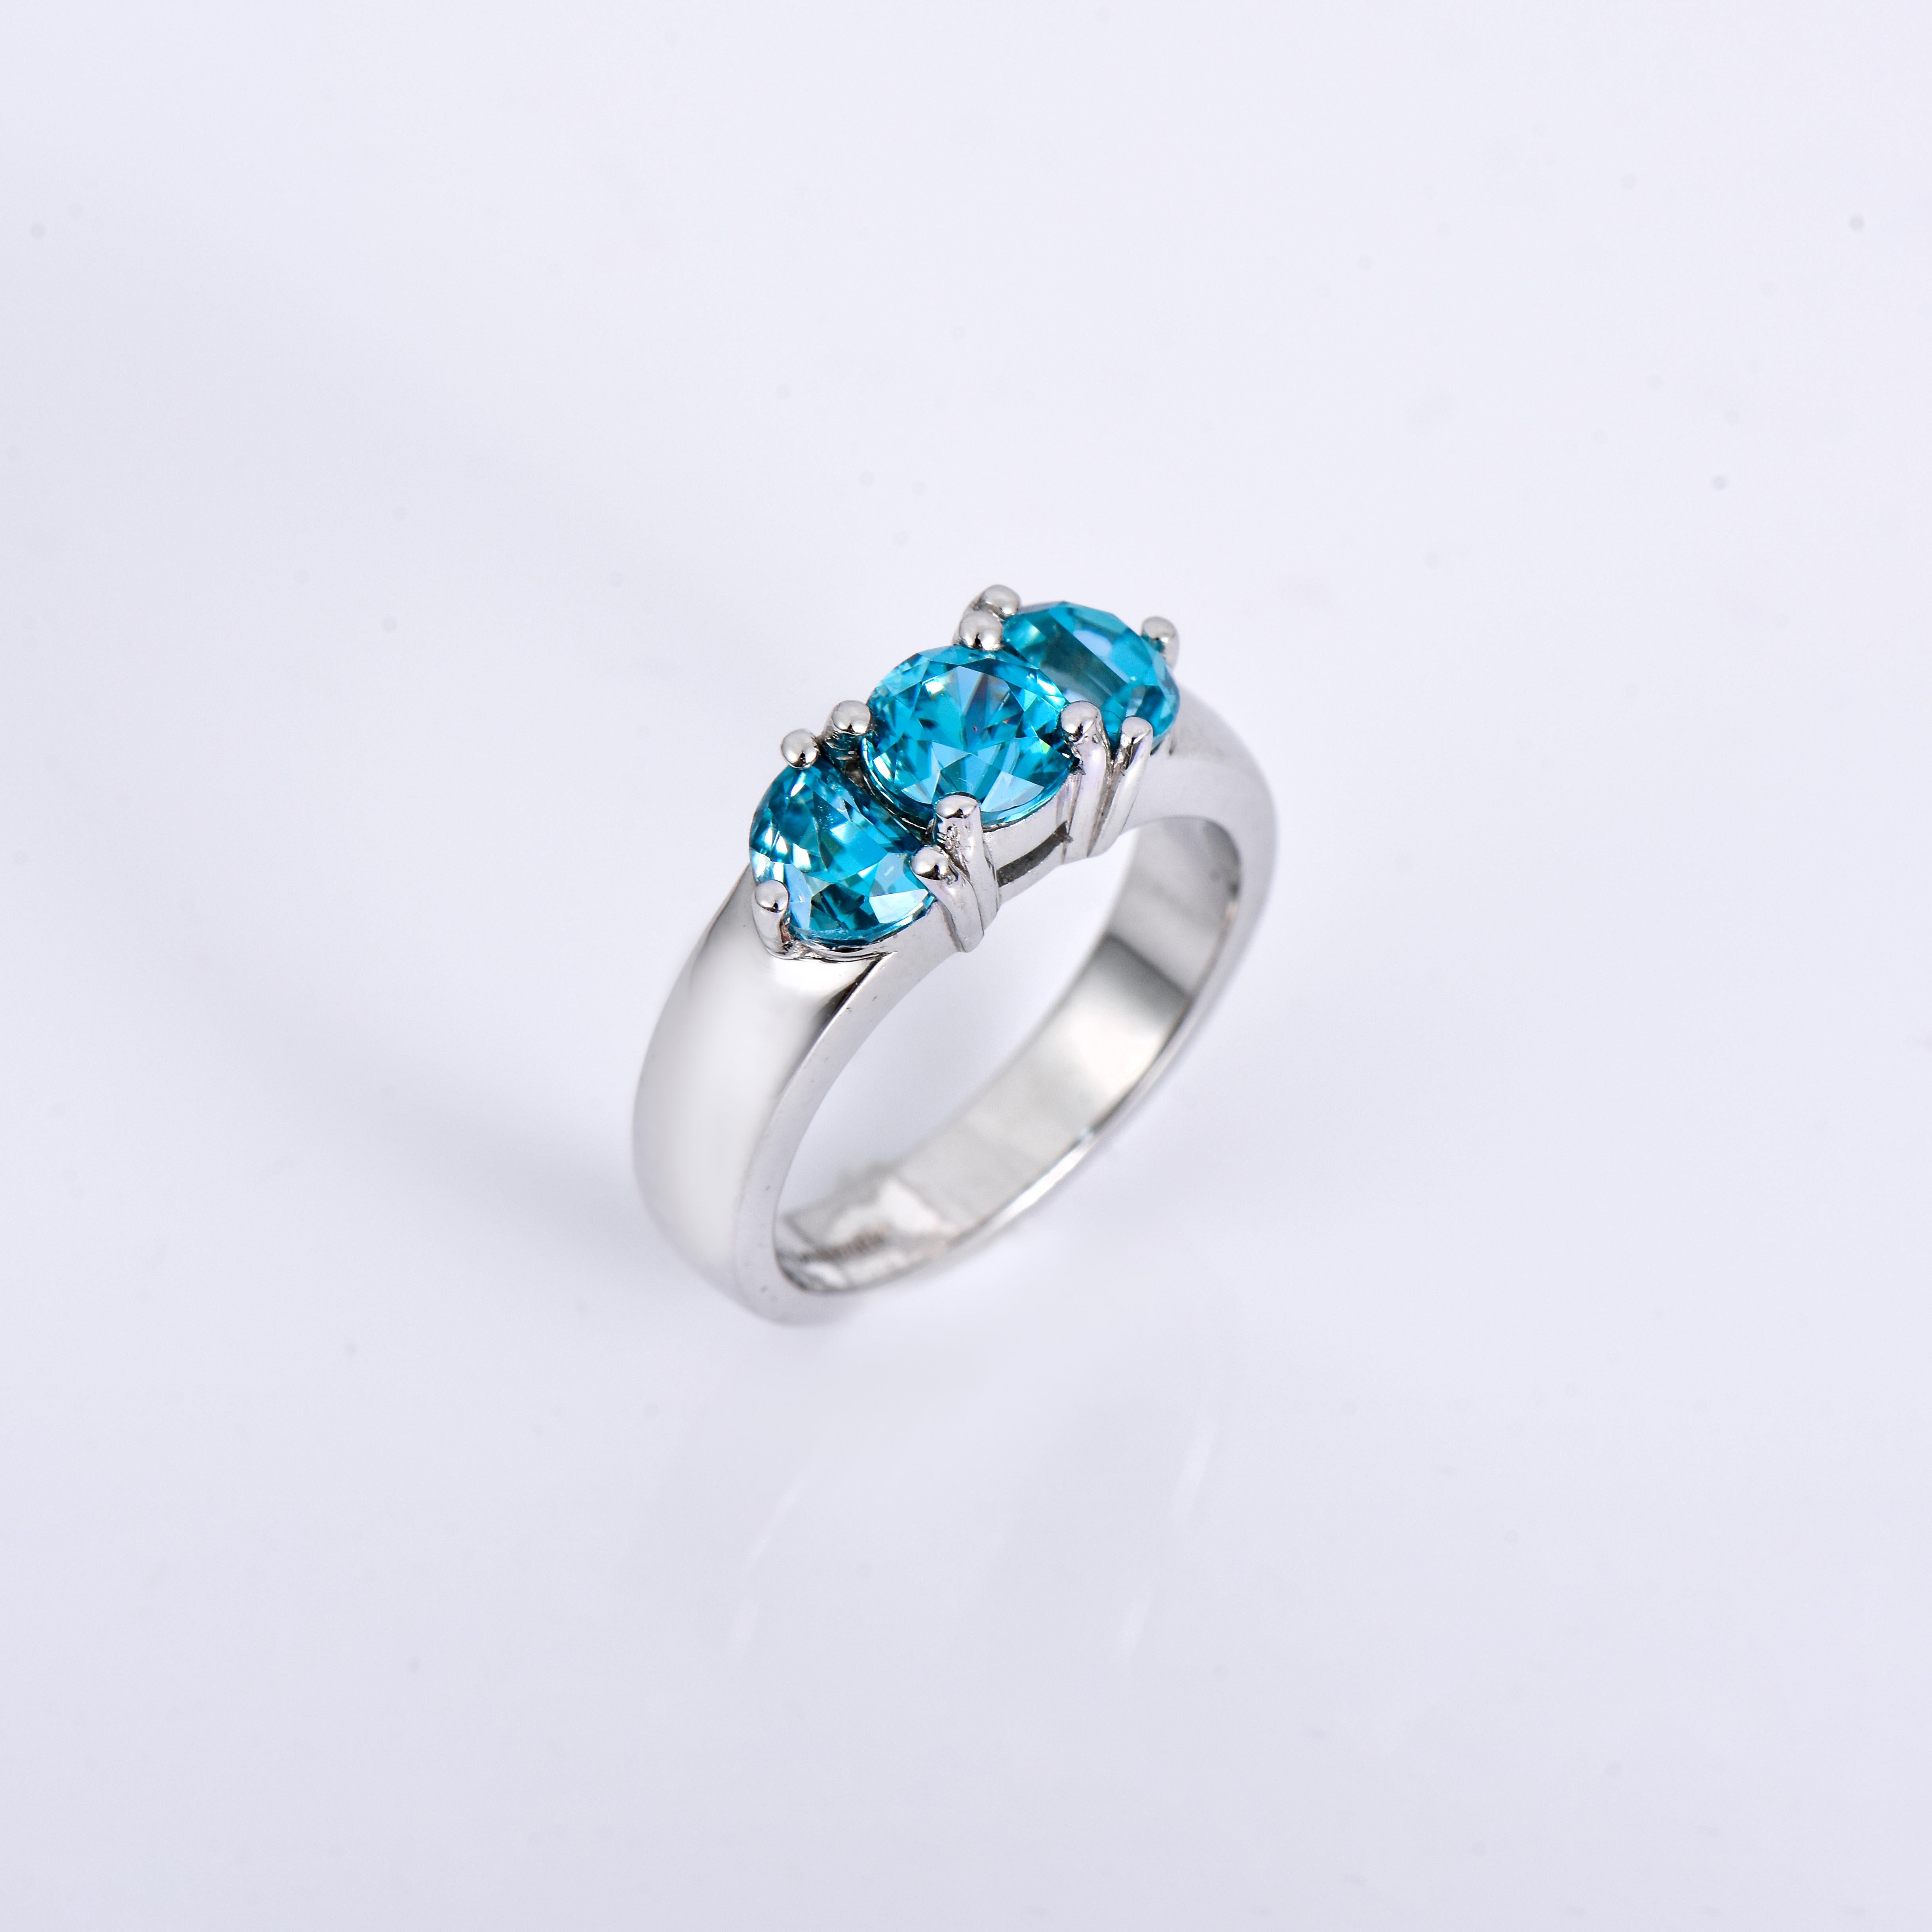 Mixed Cut Orloff of Denmark, 3.41 ct Natural Blue Zircon Ring in 925 Sterling Silver For Sale